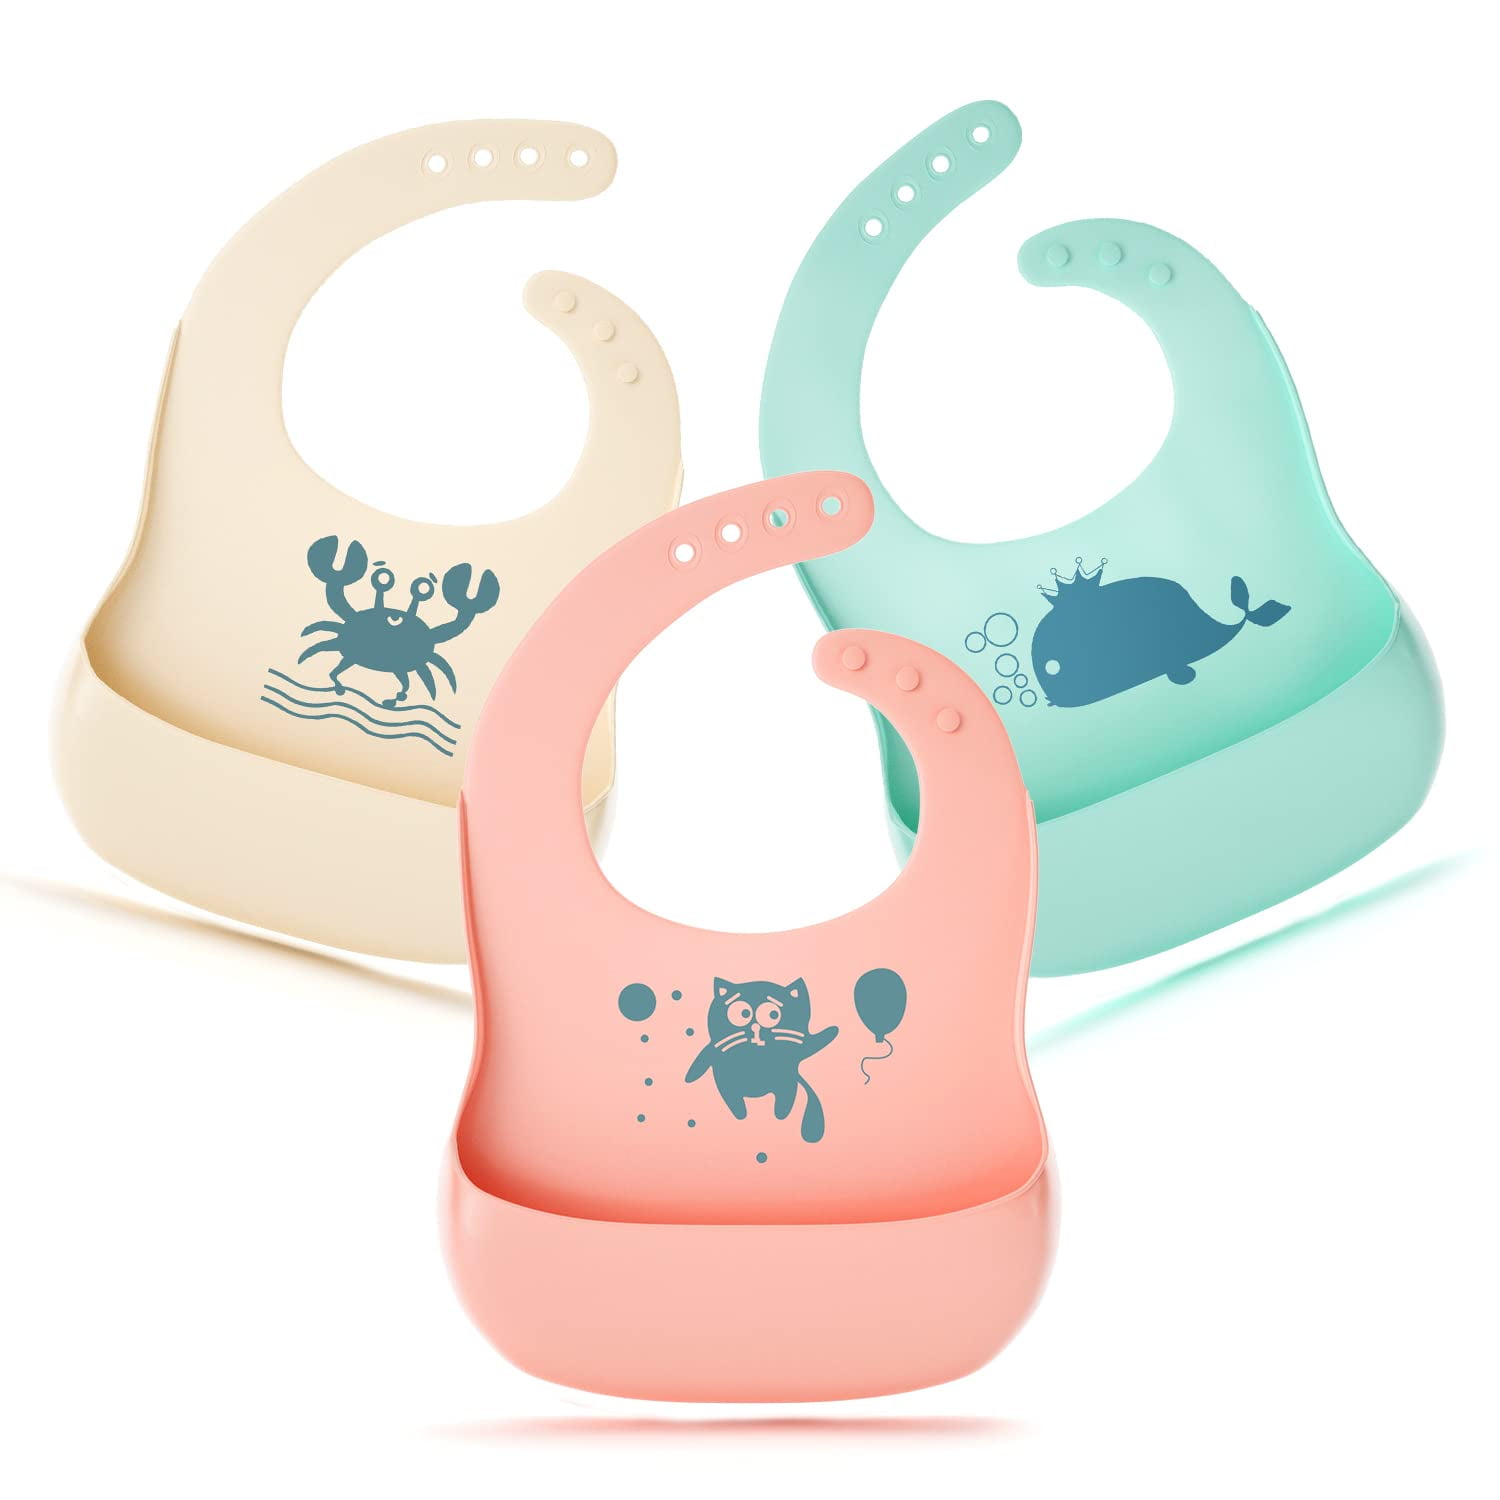 Waterproof Silicone Baby Bib Comfortable and Adjustable Soft Feeding Bibs for Babies or Toddlers Portable and Keep Stains Off Dry Set of 3 Colors Easy to Clean 6-72 Months 